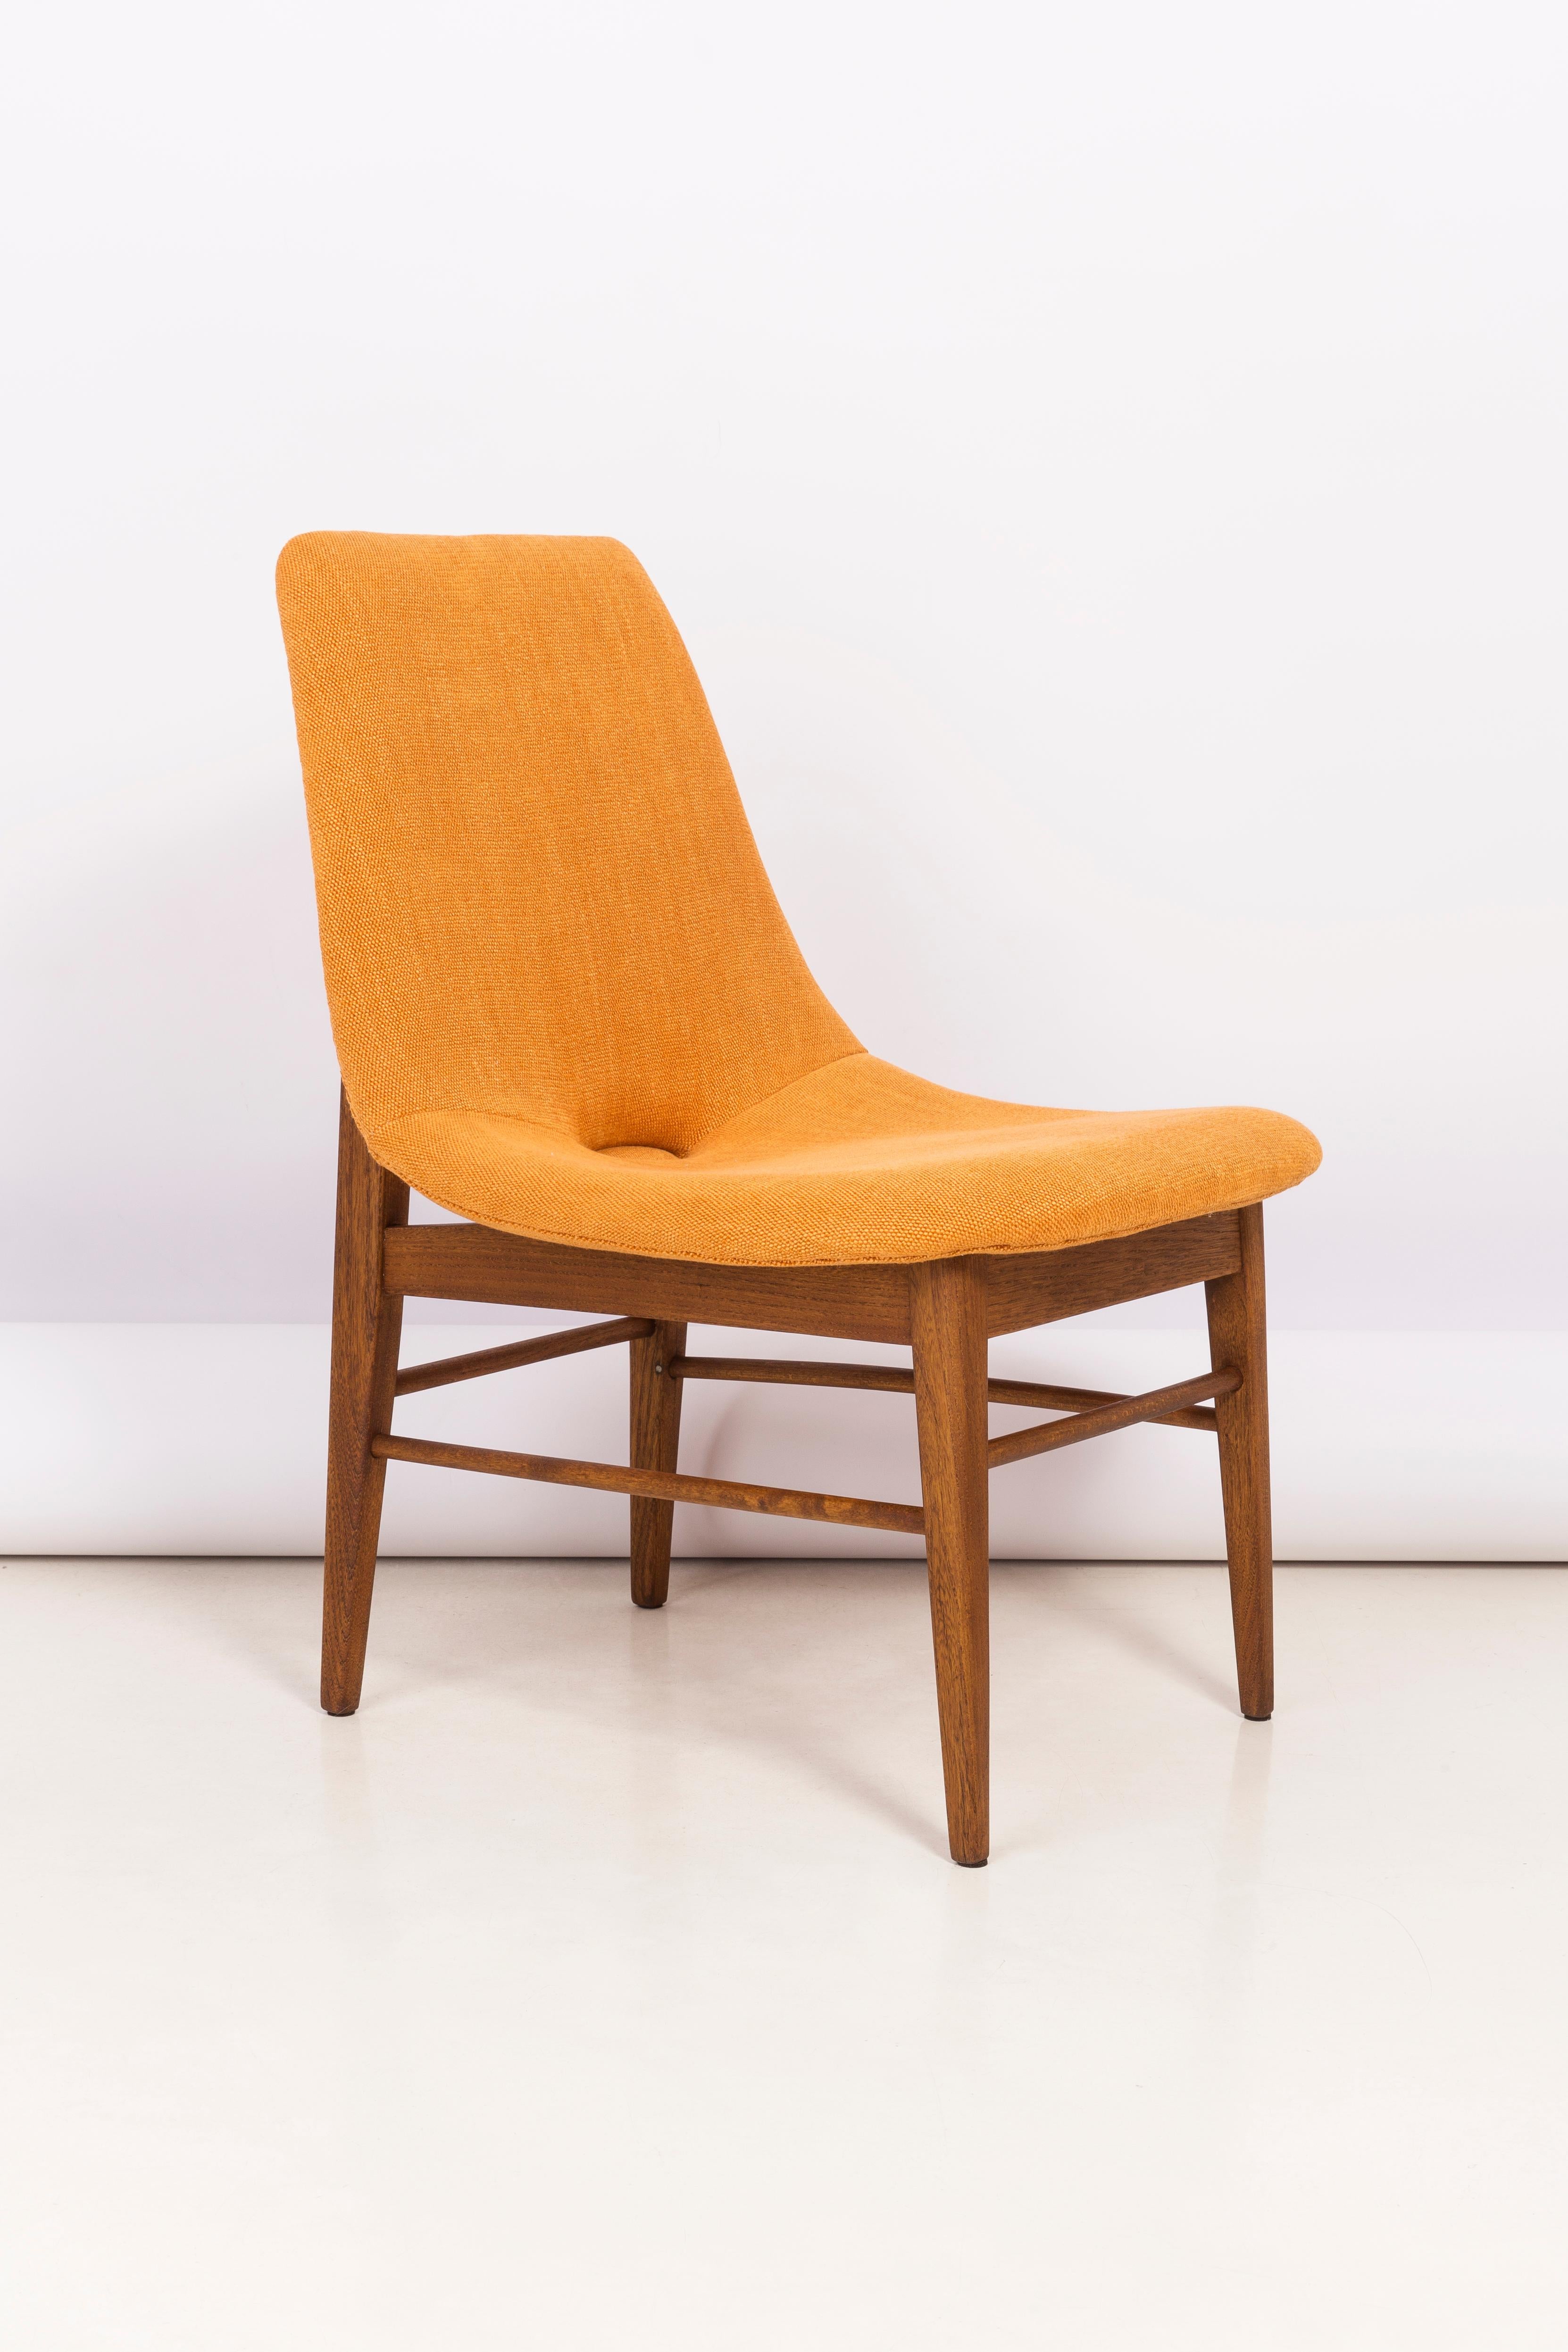 This rare chair for collectors was designed in 1956 by Hanna Lachert for the LAD Cooperative in Poland. They were made either in the late 1950s or in the 1960s.

The furniture structure made of ash has undergone a complete renovation and has been